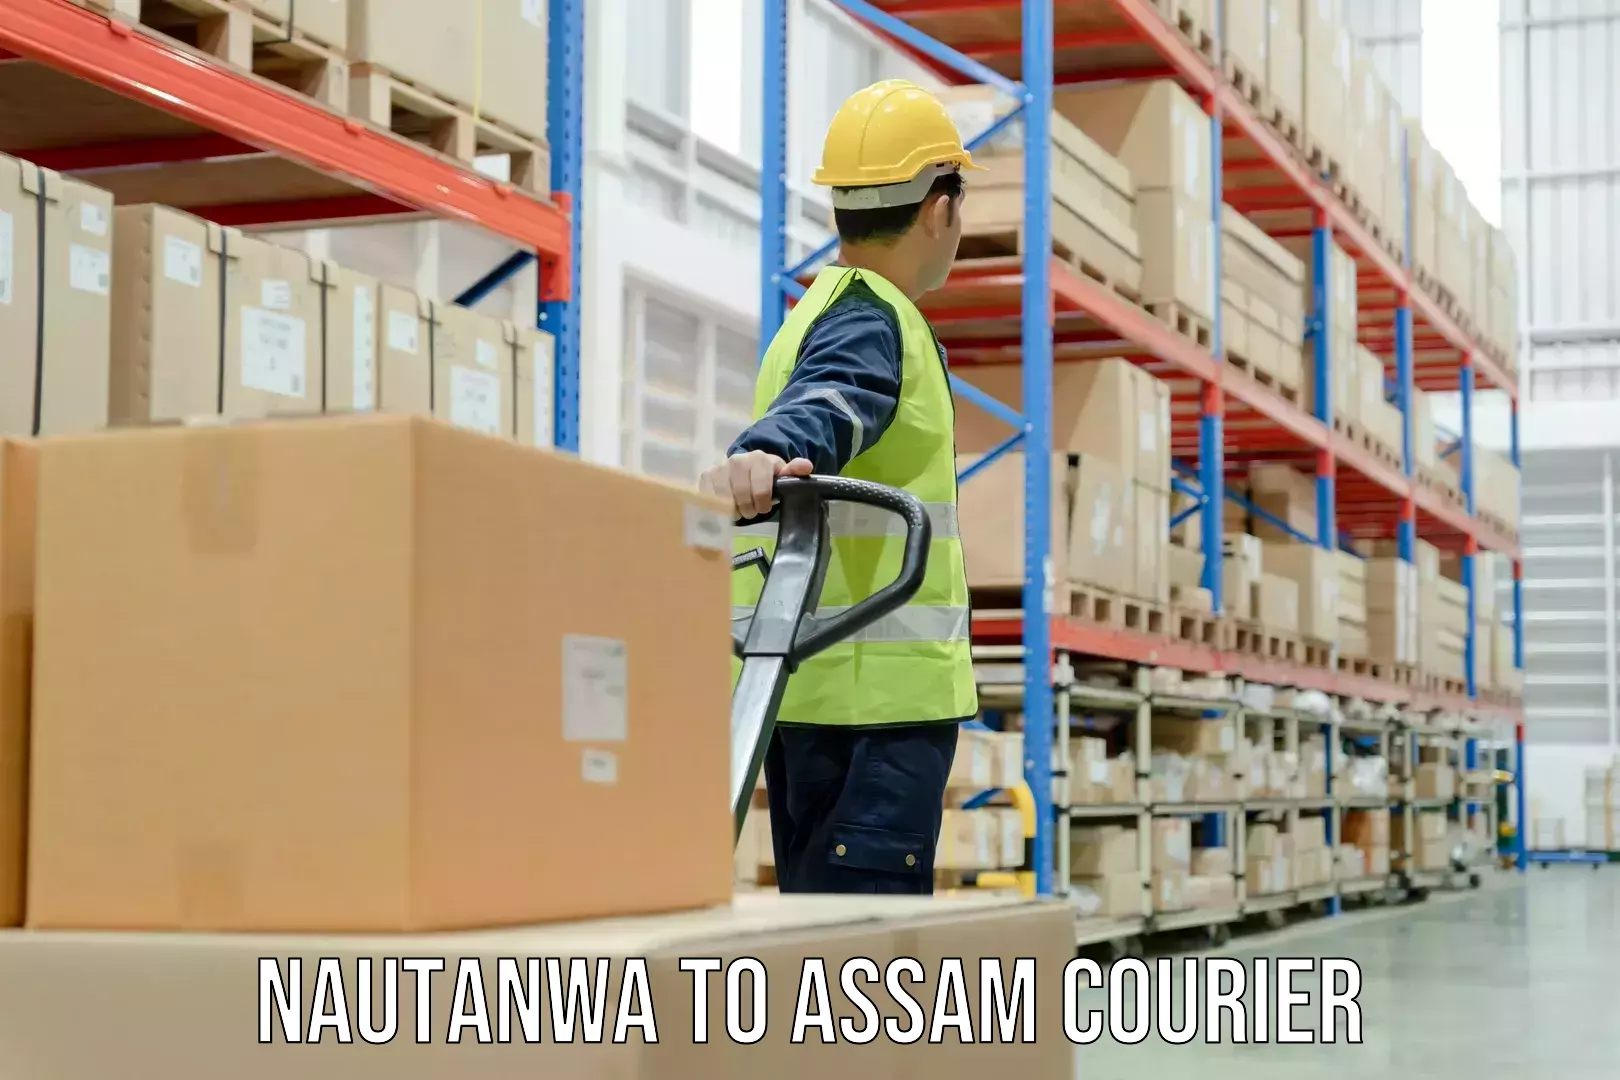 User-friendly delivery service Nautanwa to Assam